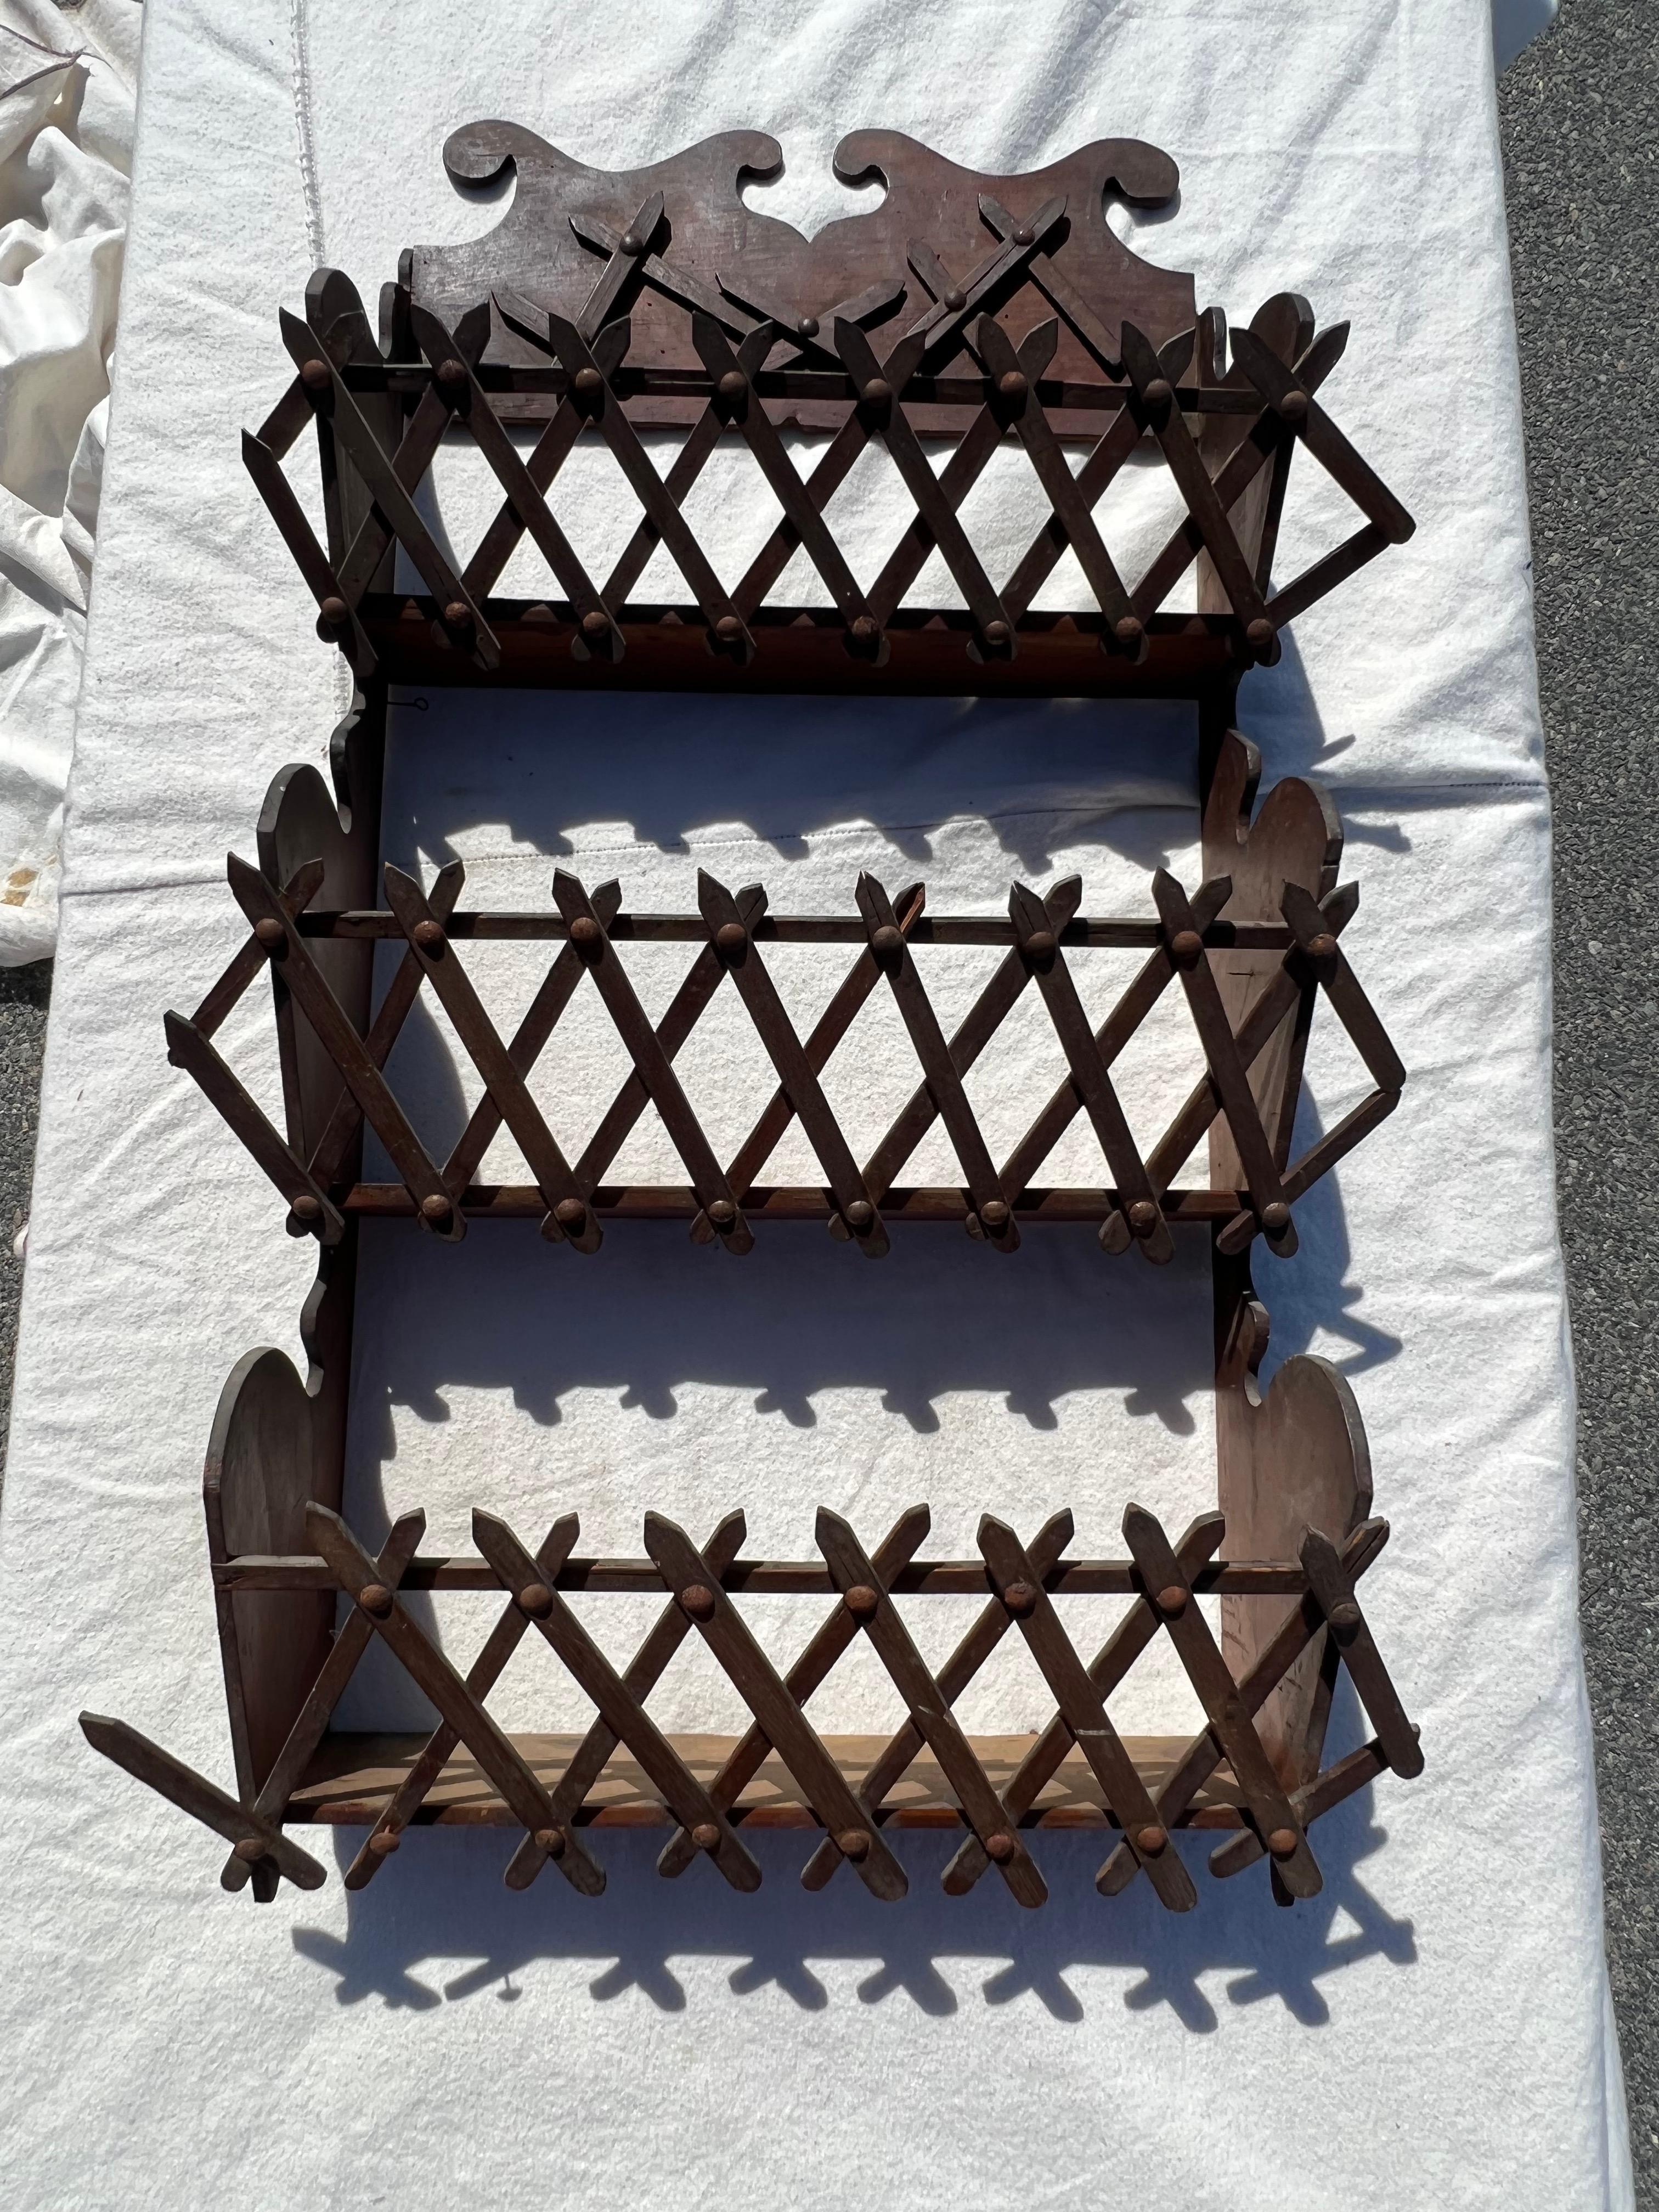 19th Century Tramp Art wall hanging rack with carved crossed sticks and carved rosettes on one side.